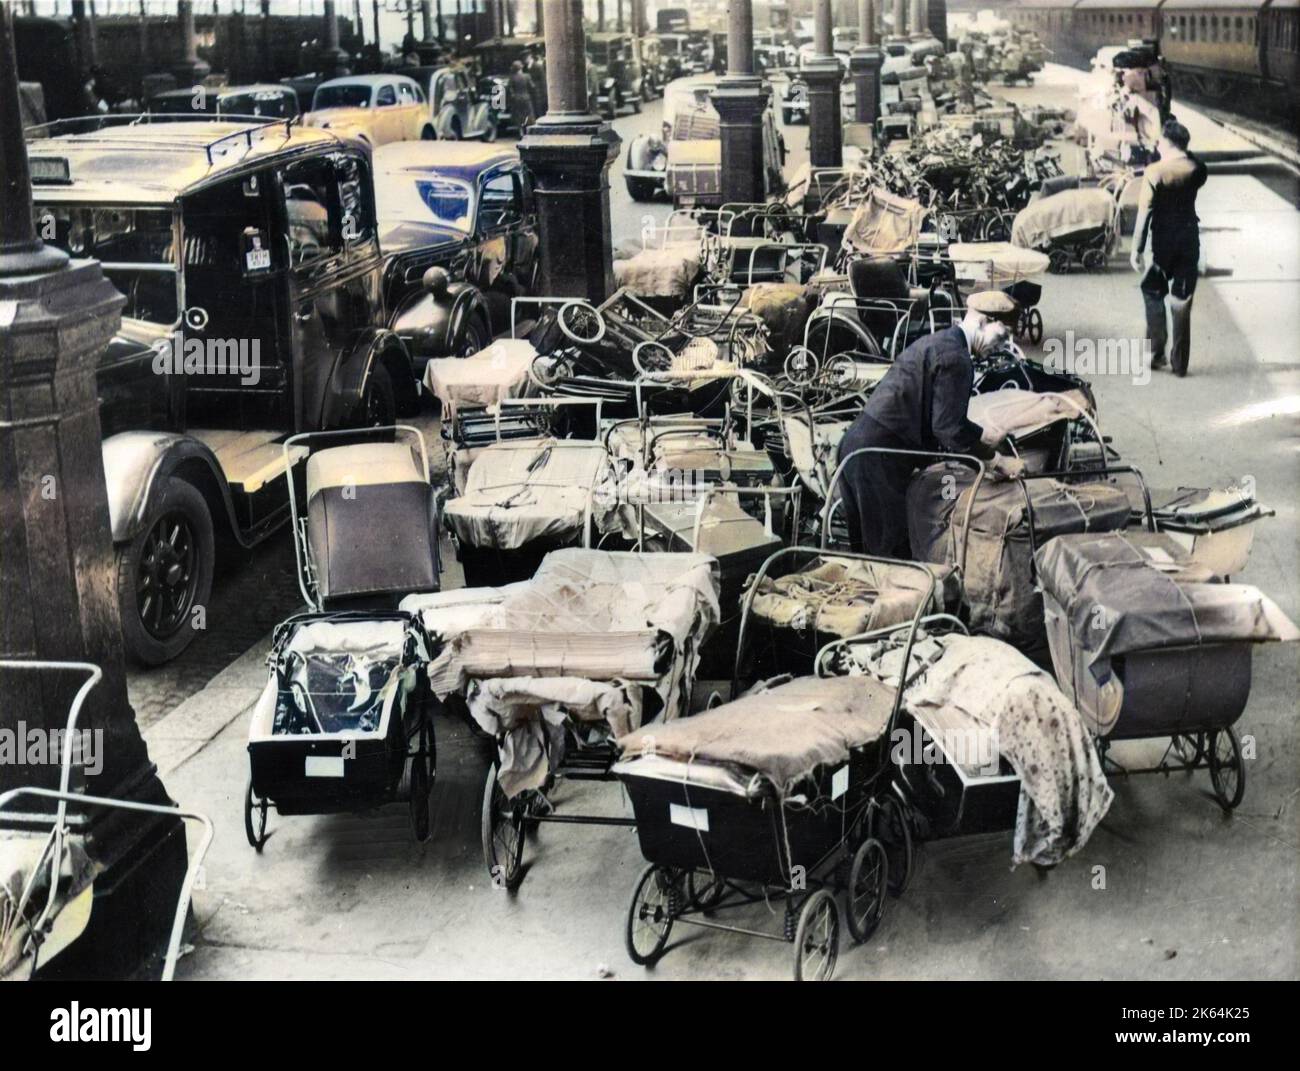 WW2 - Prams containing possessions return to Euston, London, following Evacuees heading home after the passing of the V1 and V2 rocket attack scare - September 1944. Stock Photo